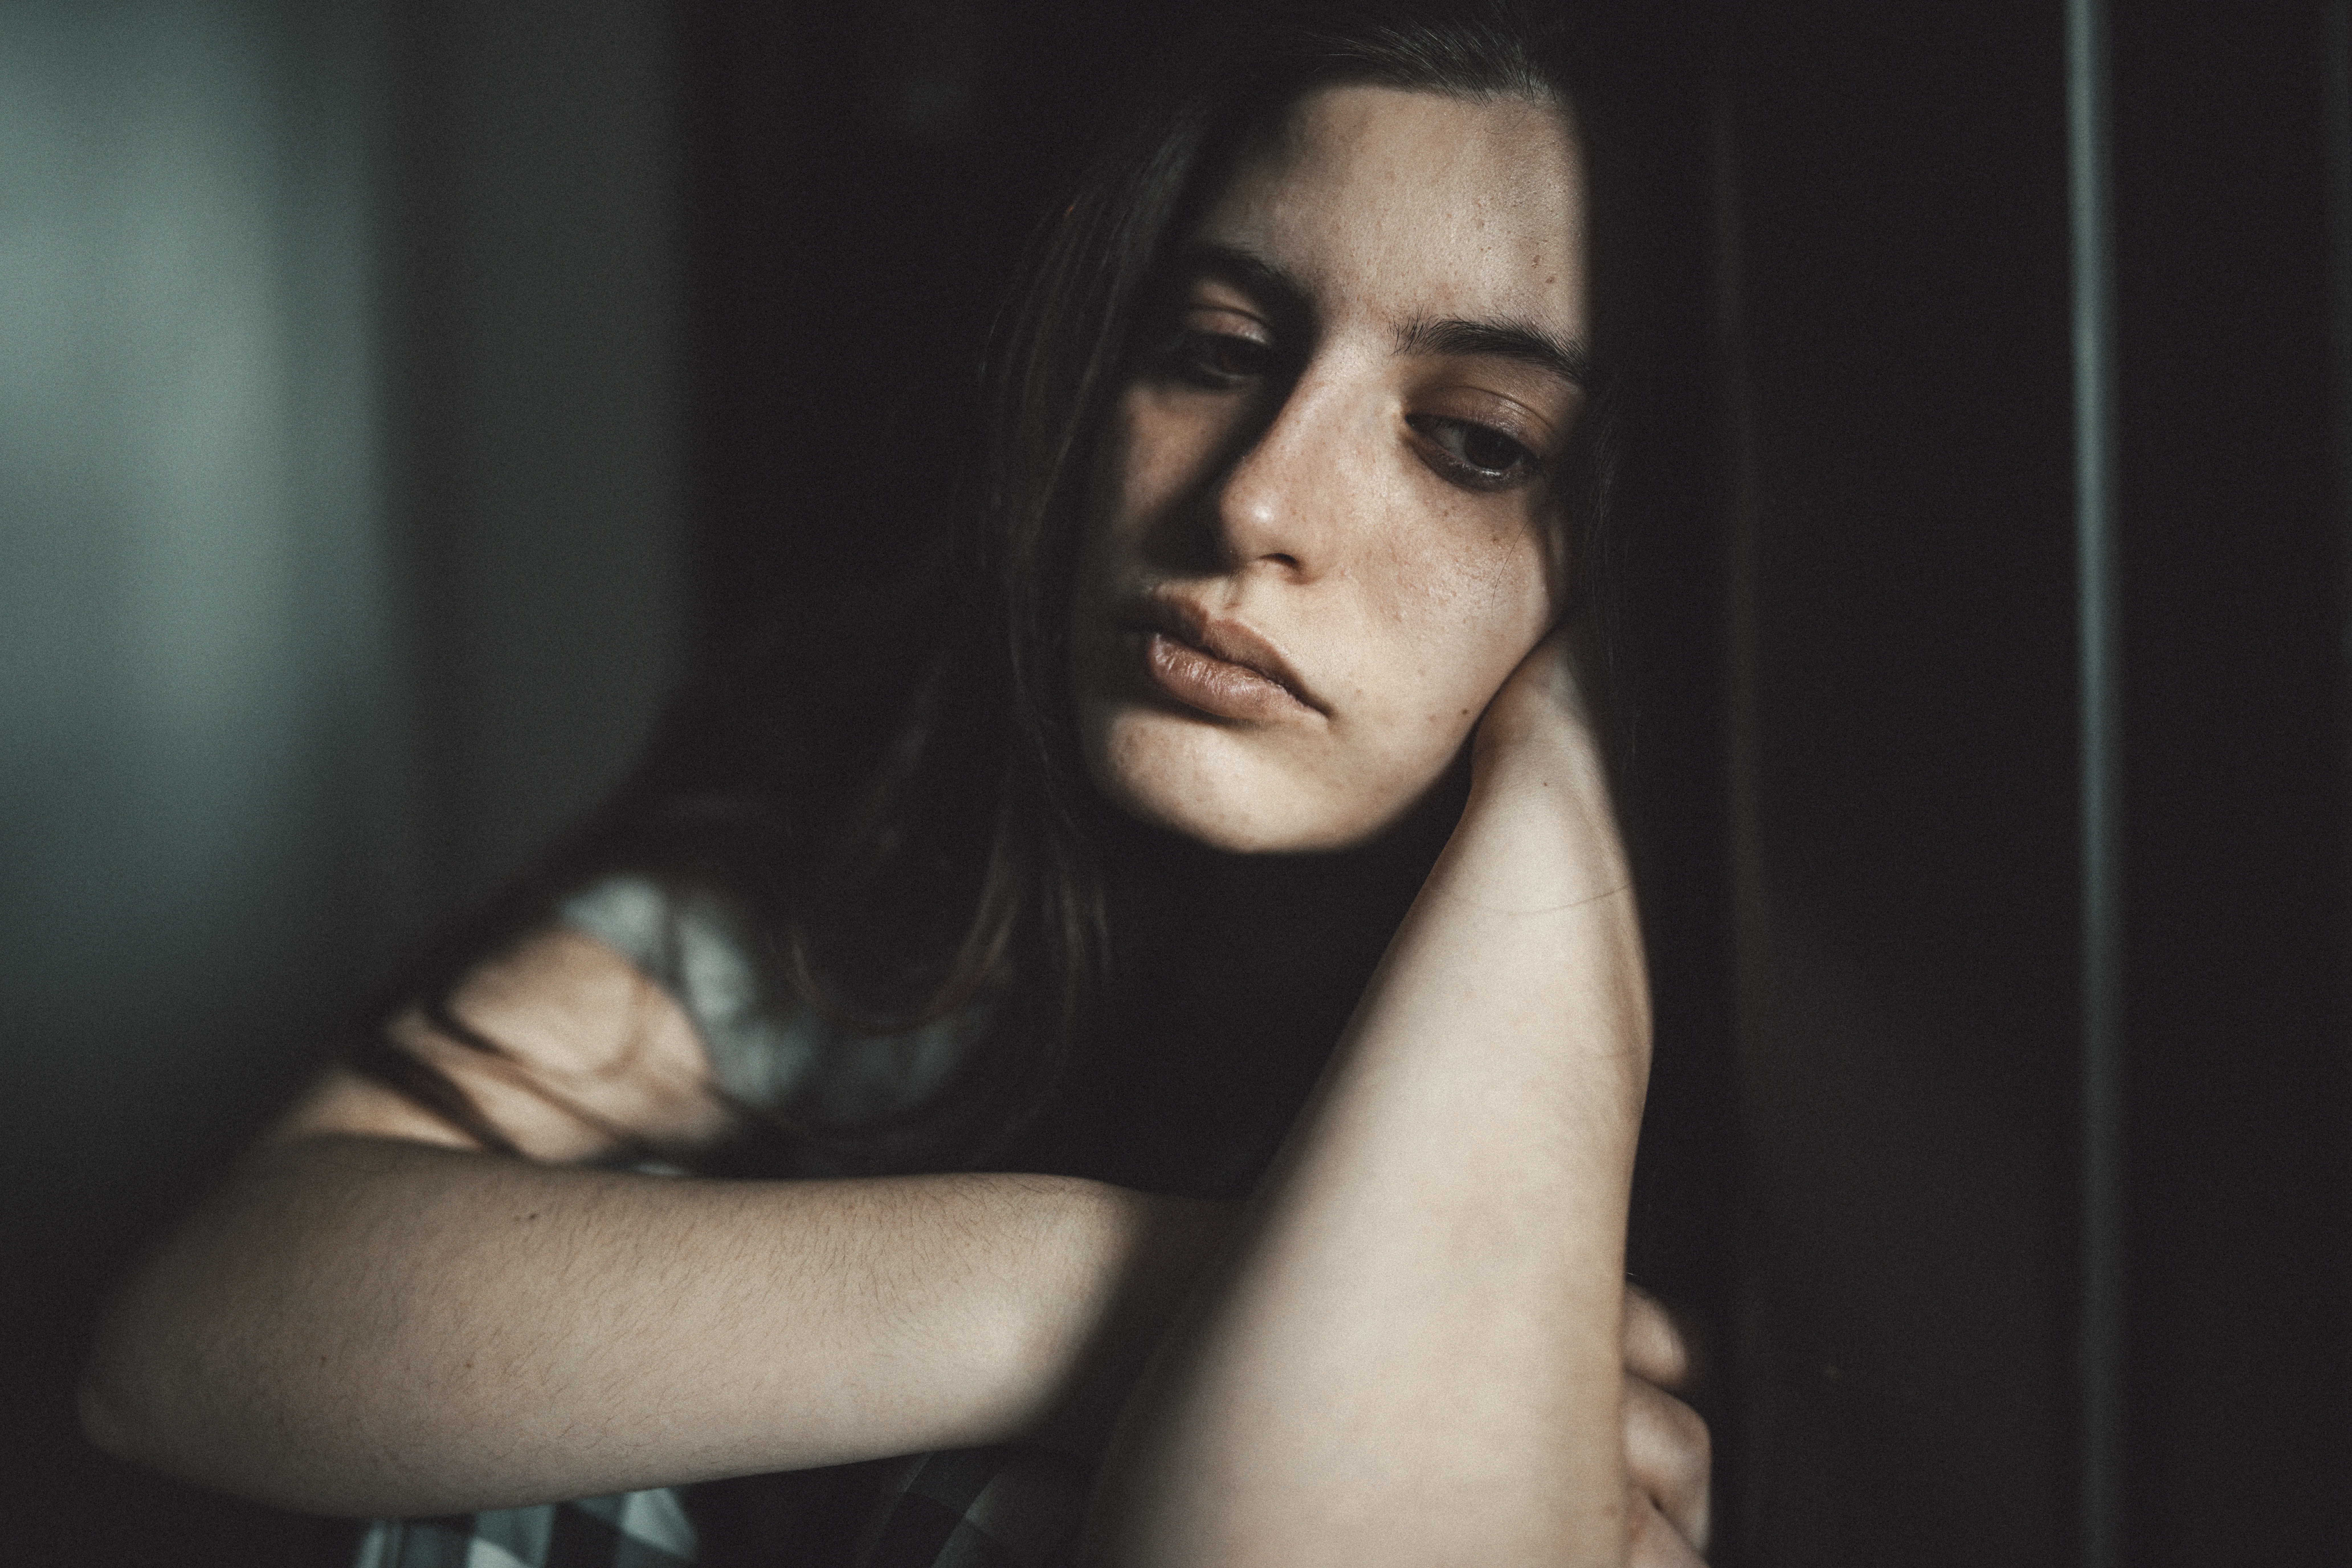 Young women struggling with depression and loneliness.